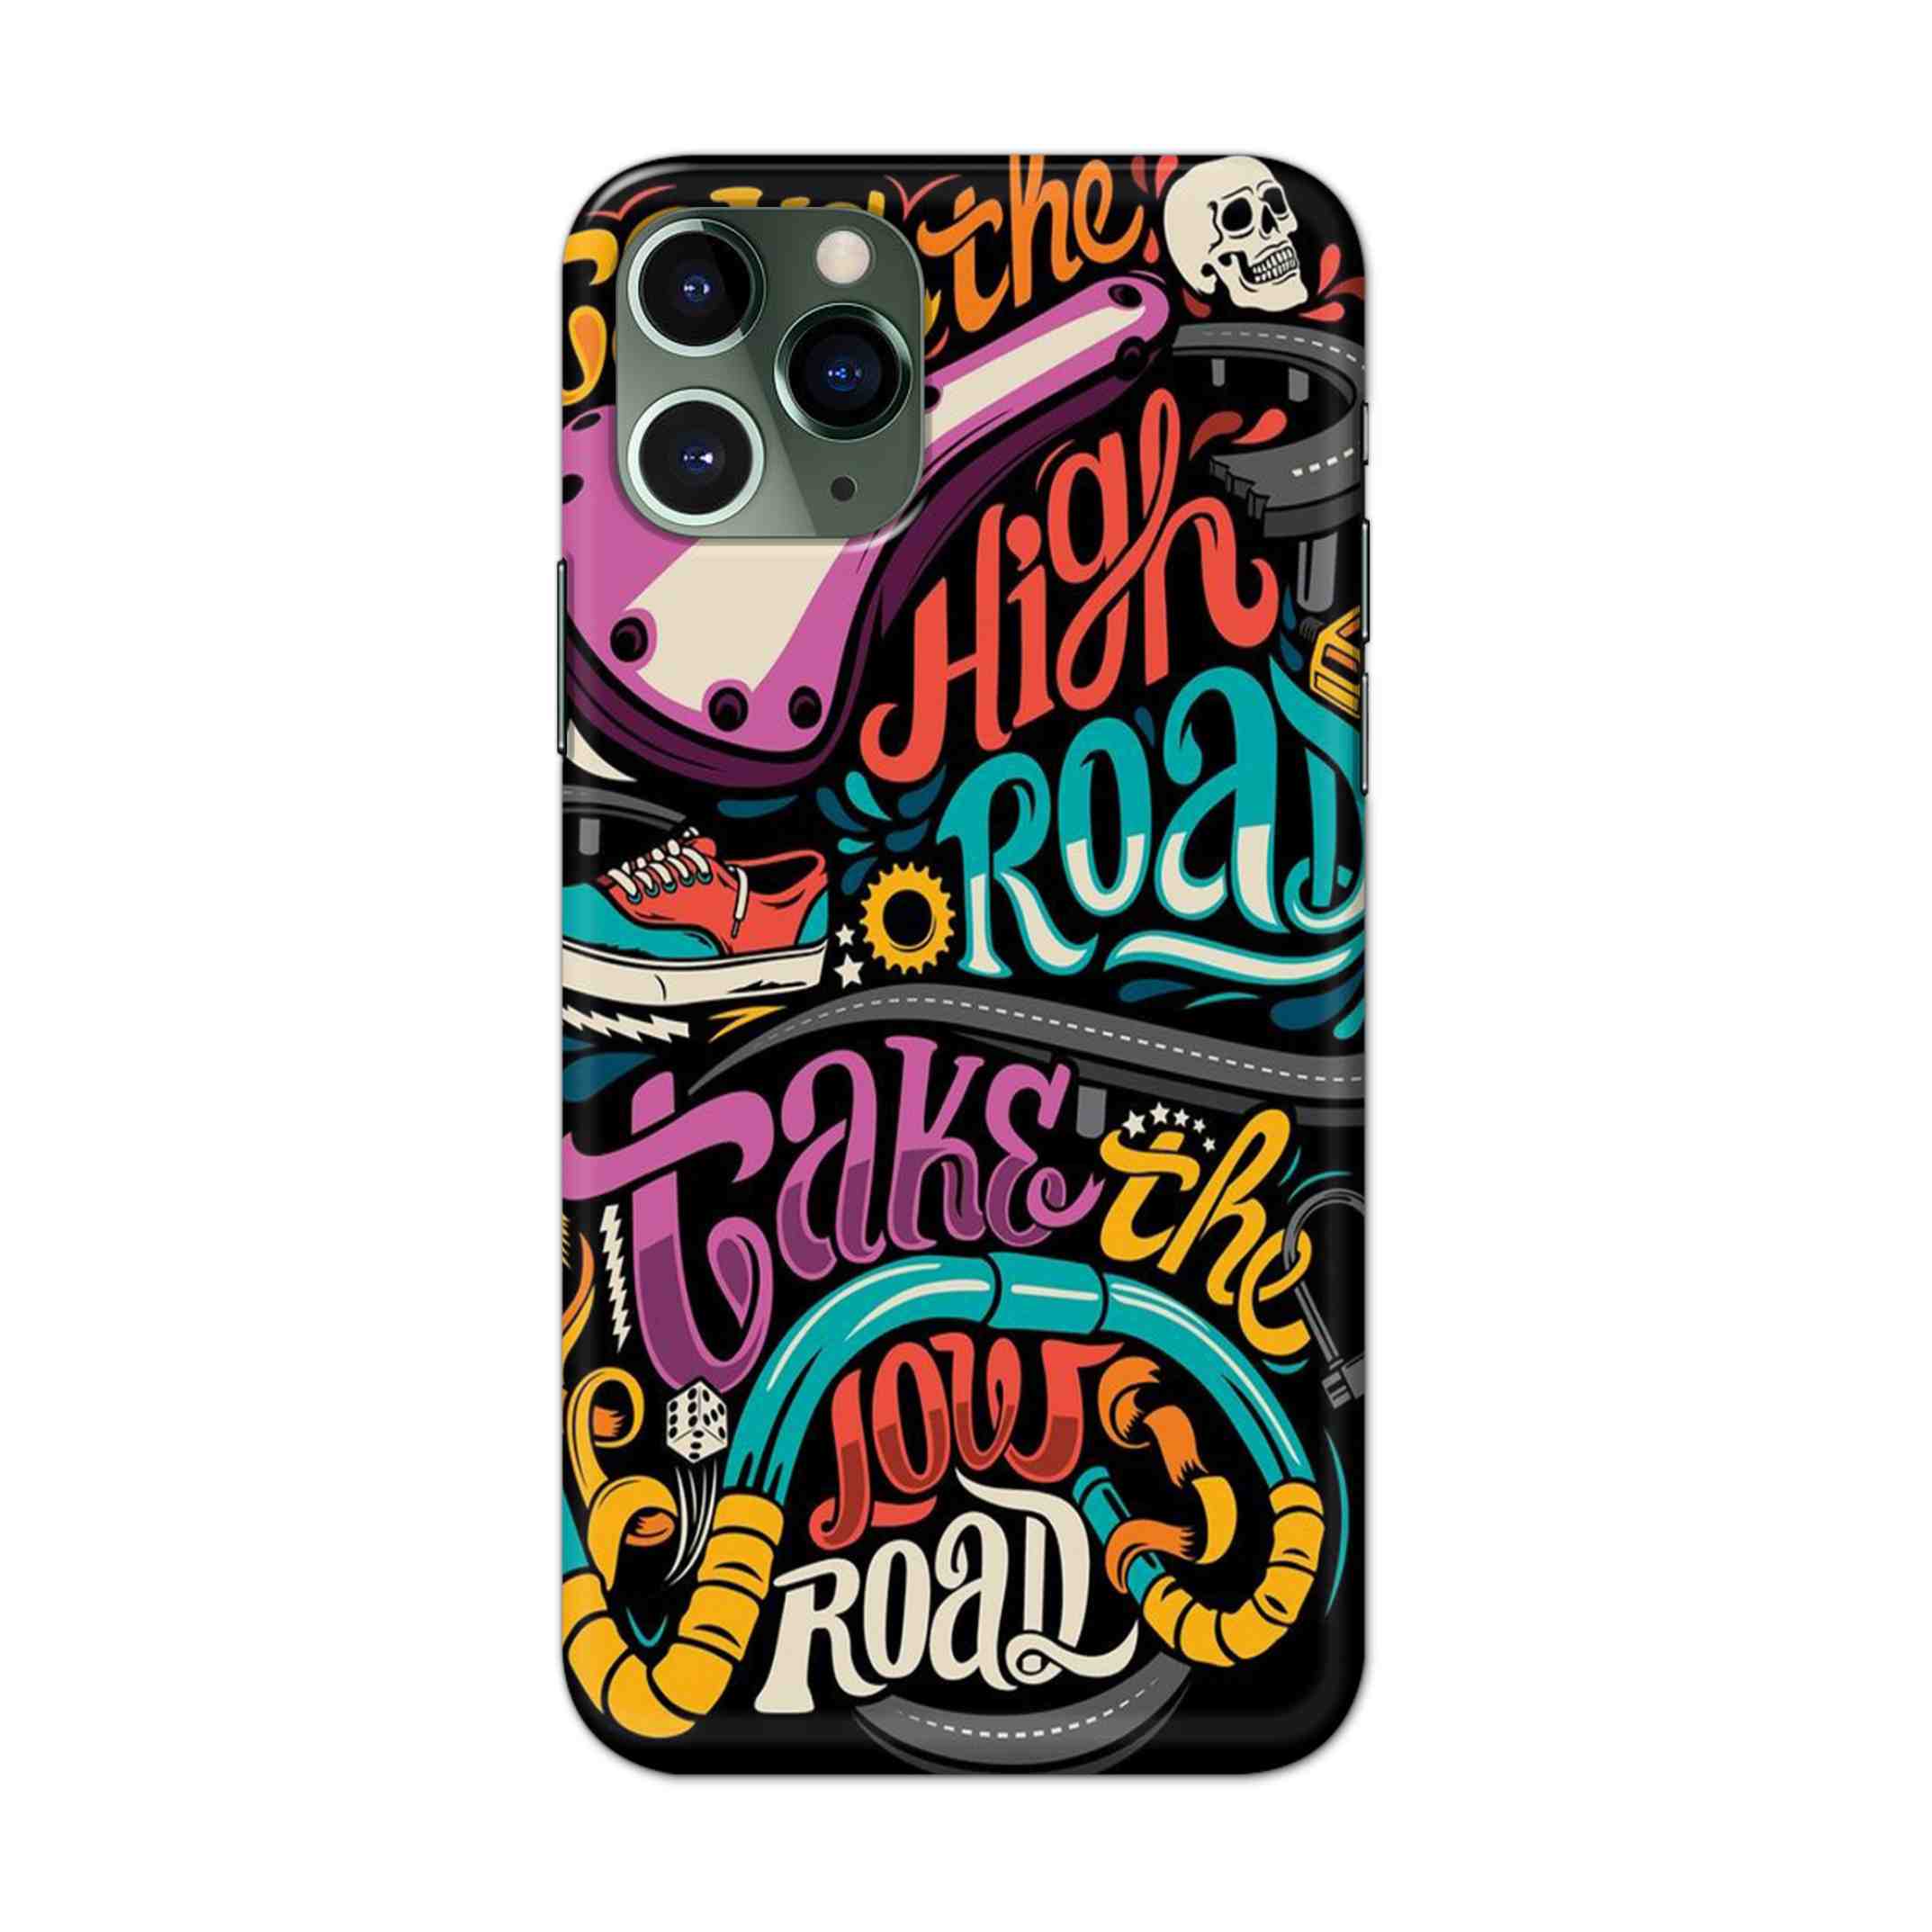 Buy Take The High Road Hard Back Mobile Phone Case/Cover For iPhone 11 Pro Max Online